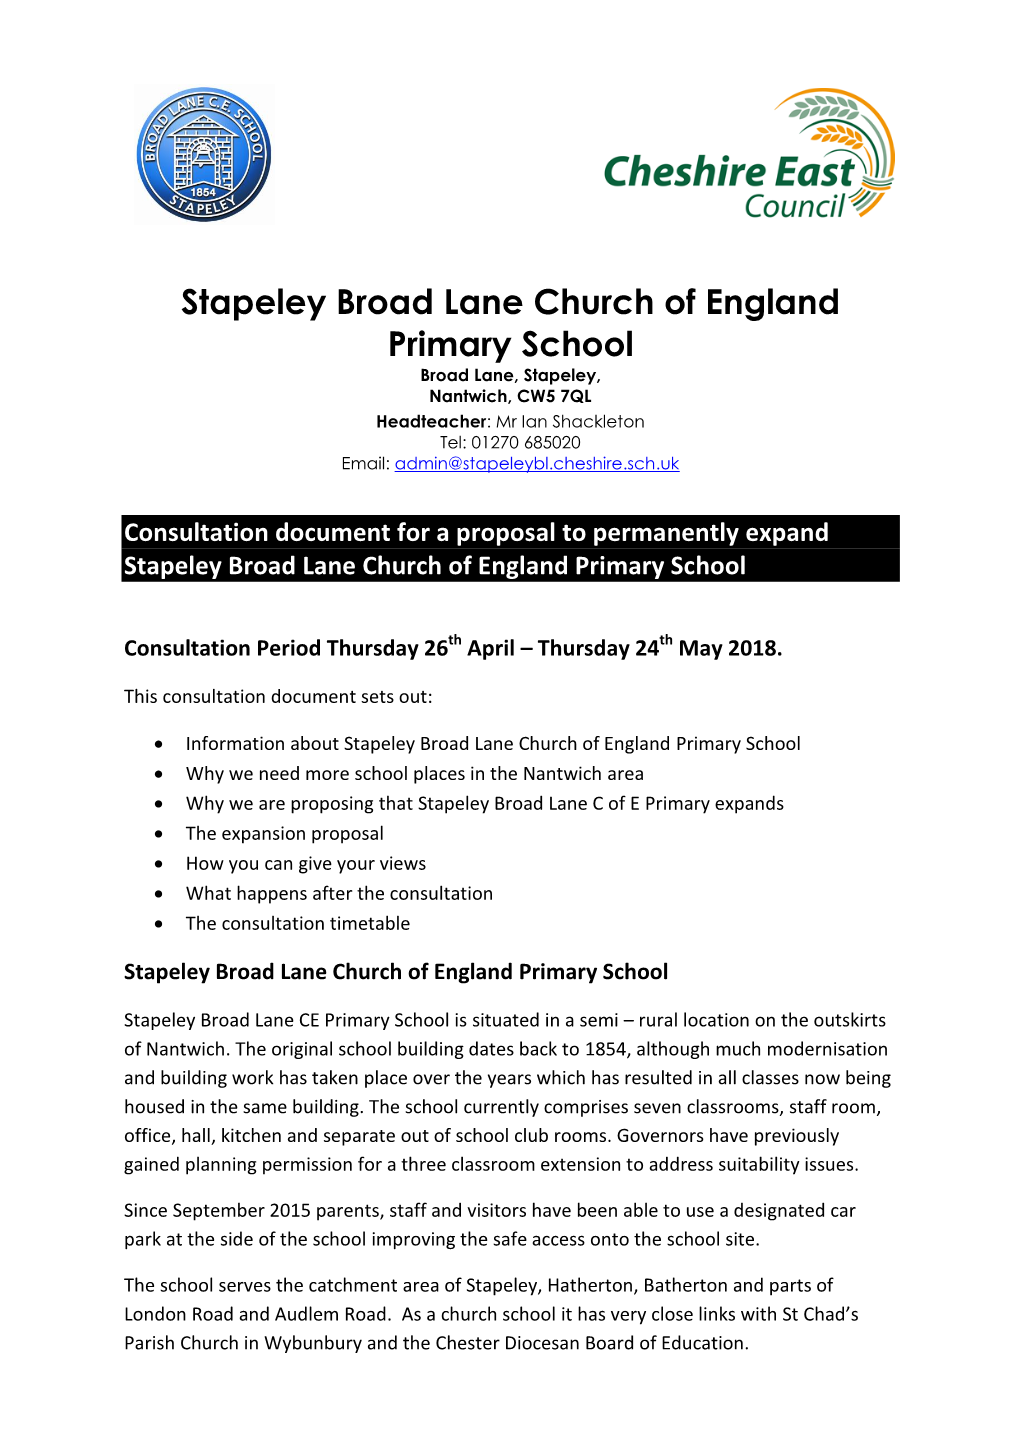 Stapeley Broad Lane Church of England Primary School Broad Lane, Stapeley, Nantwich, CW5 7QL